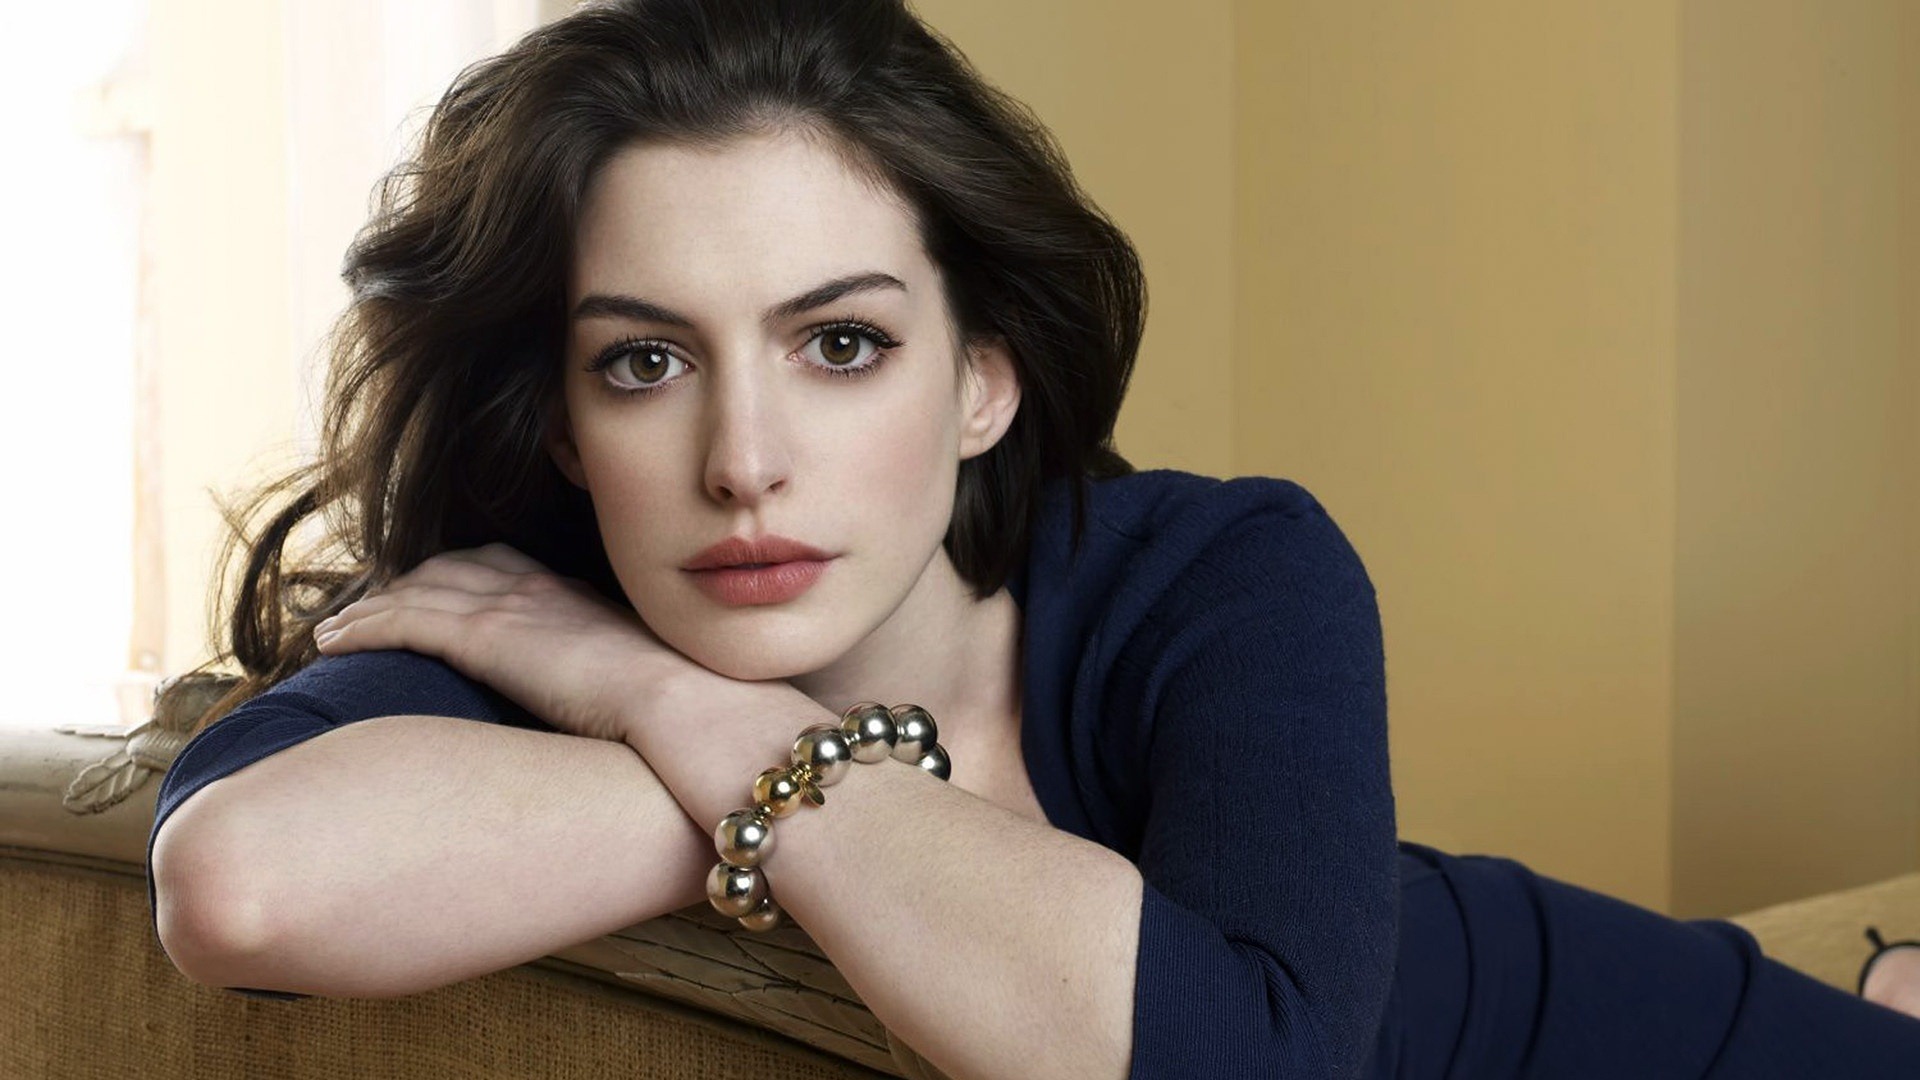 Anne Hathaway Arena Pile Top 10 Hollywood Actresses With Beautiful Big Eyes